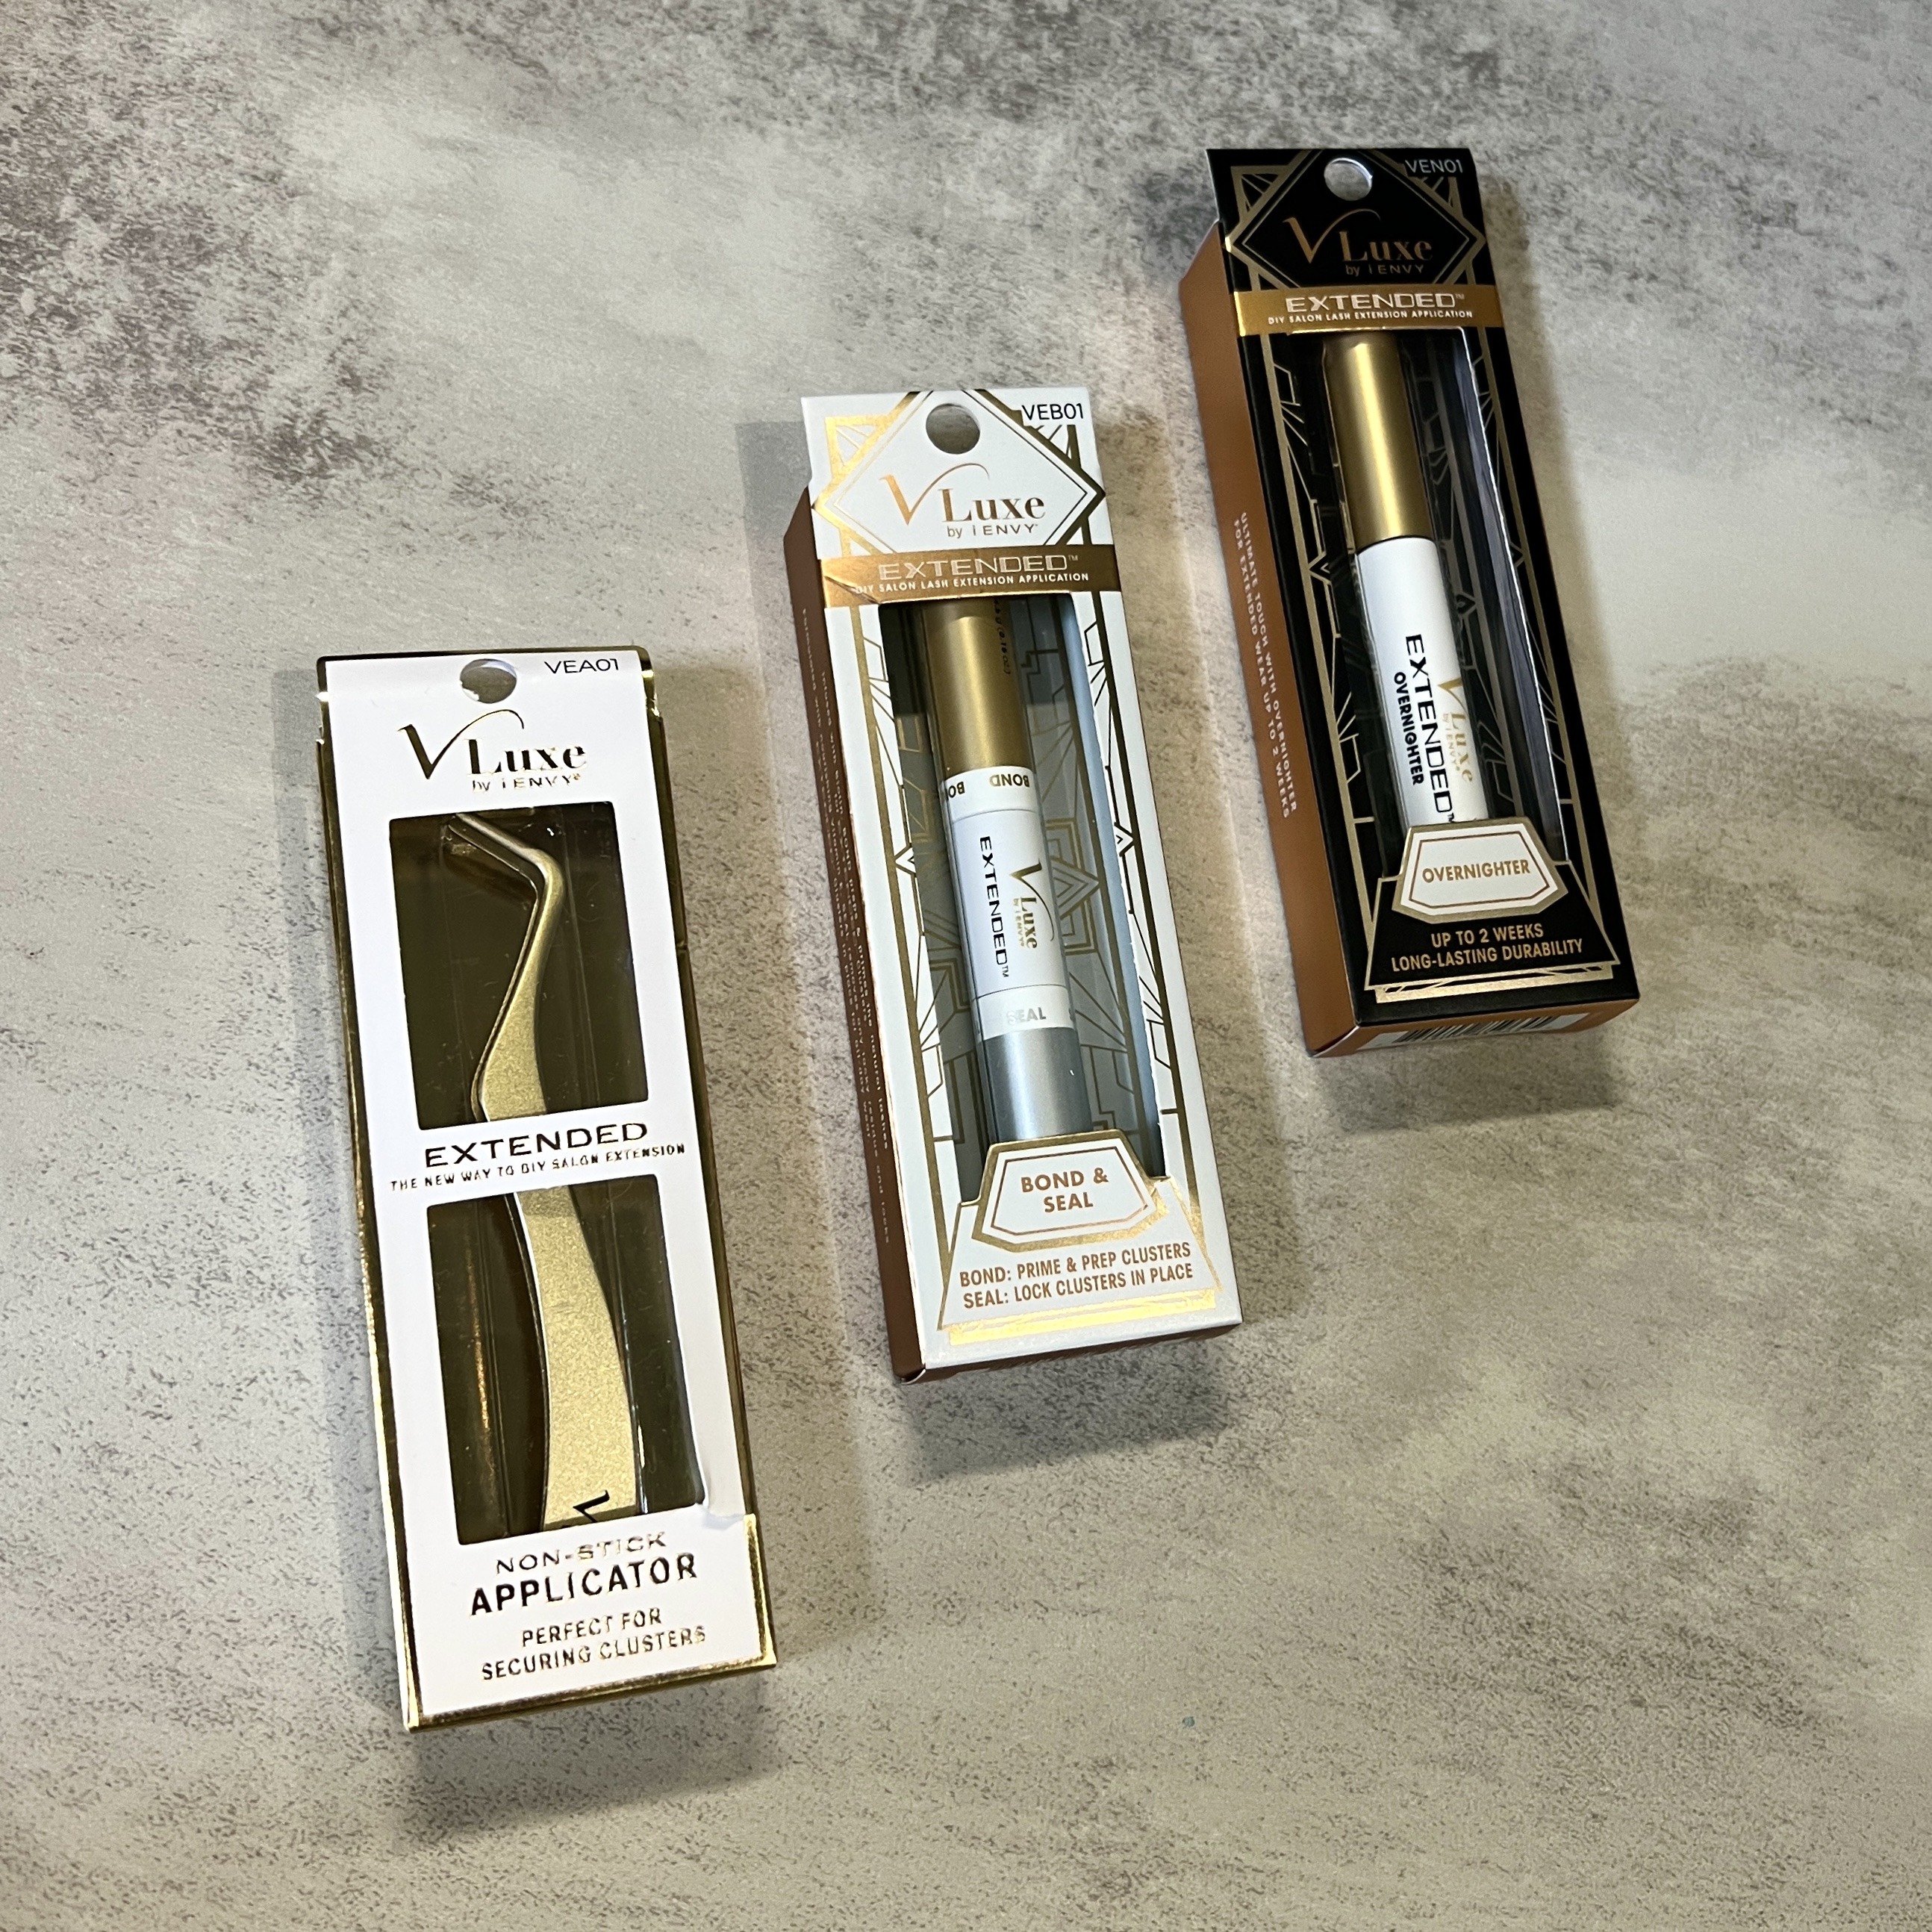 V Luxe Extended Applicator and Bond and Seal for Cocotique July 2023